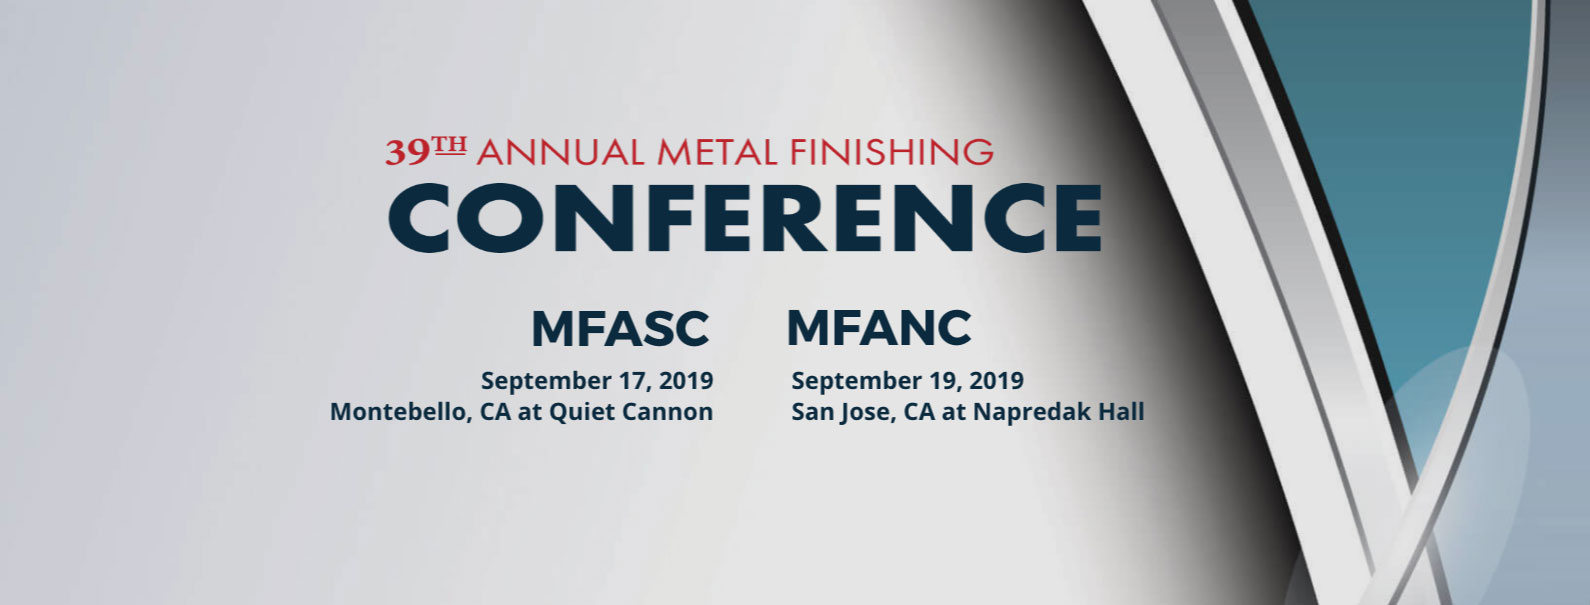 2019 Annual Metal Finishing Conference